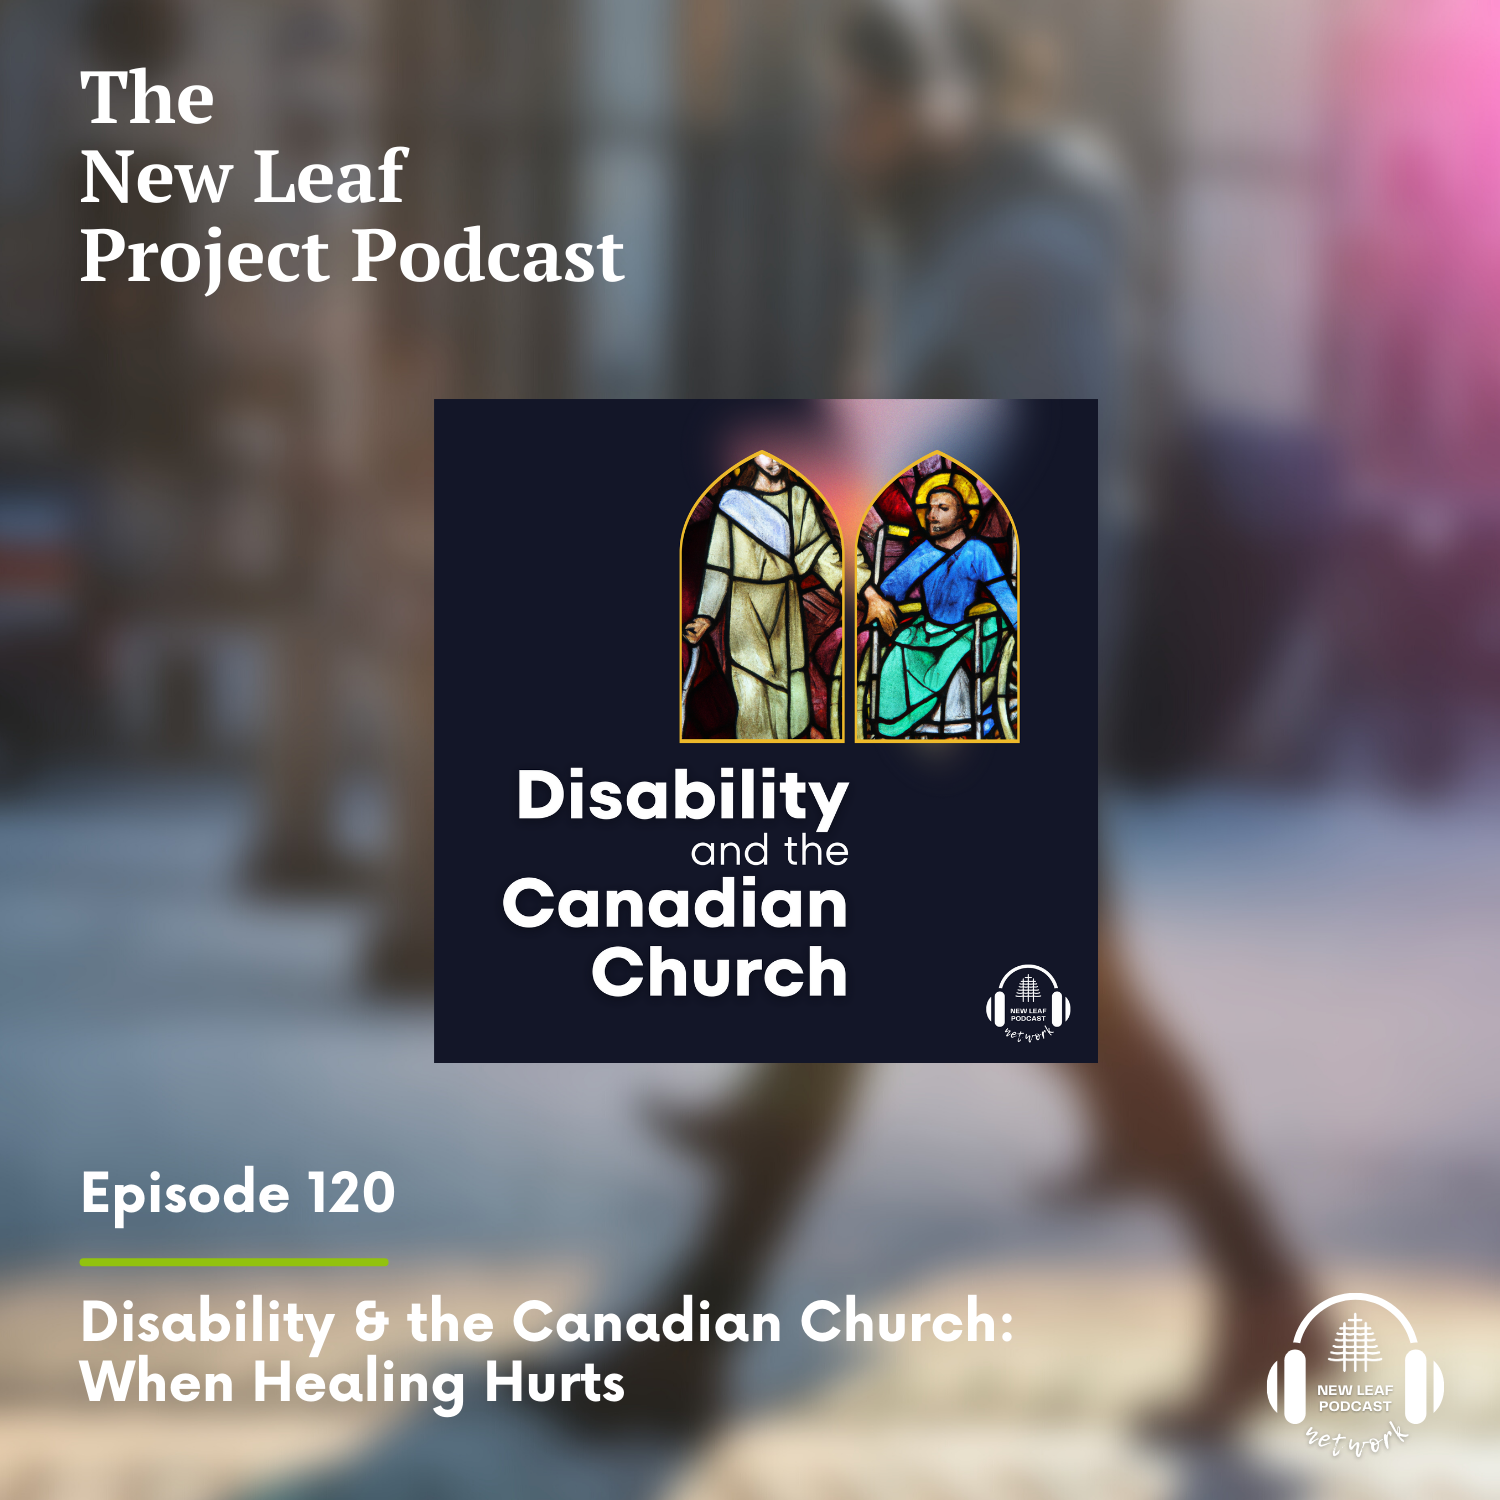 Ep 120 - Disability & the Canadian Church: When Healing Hurts